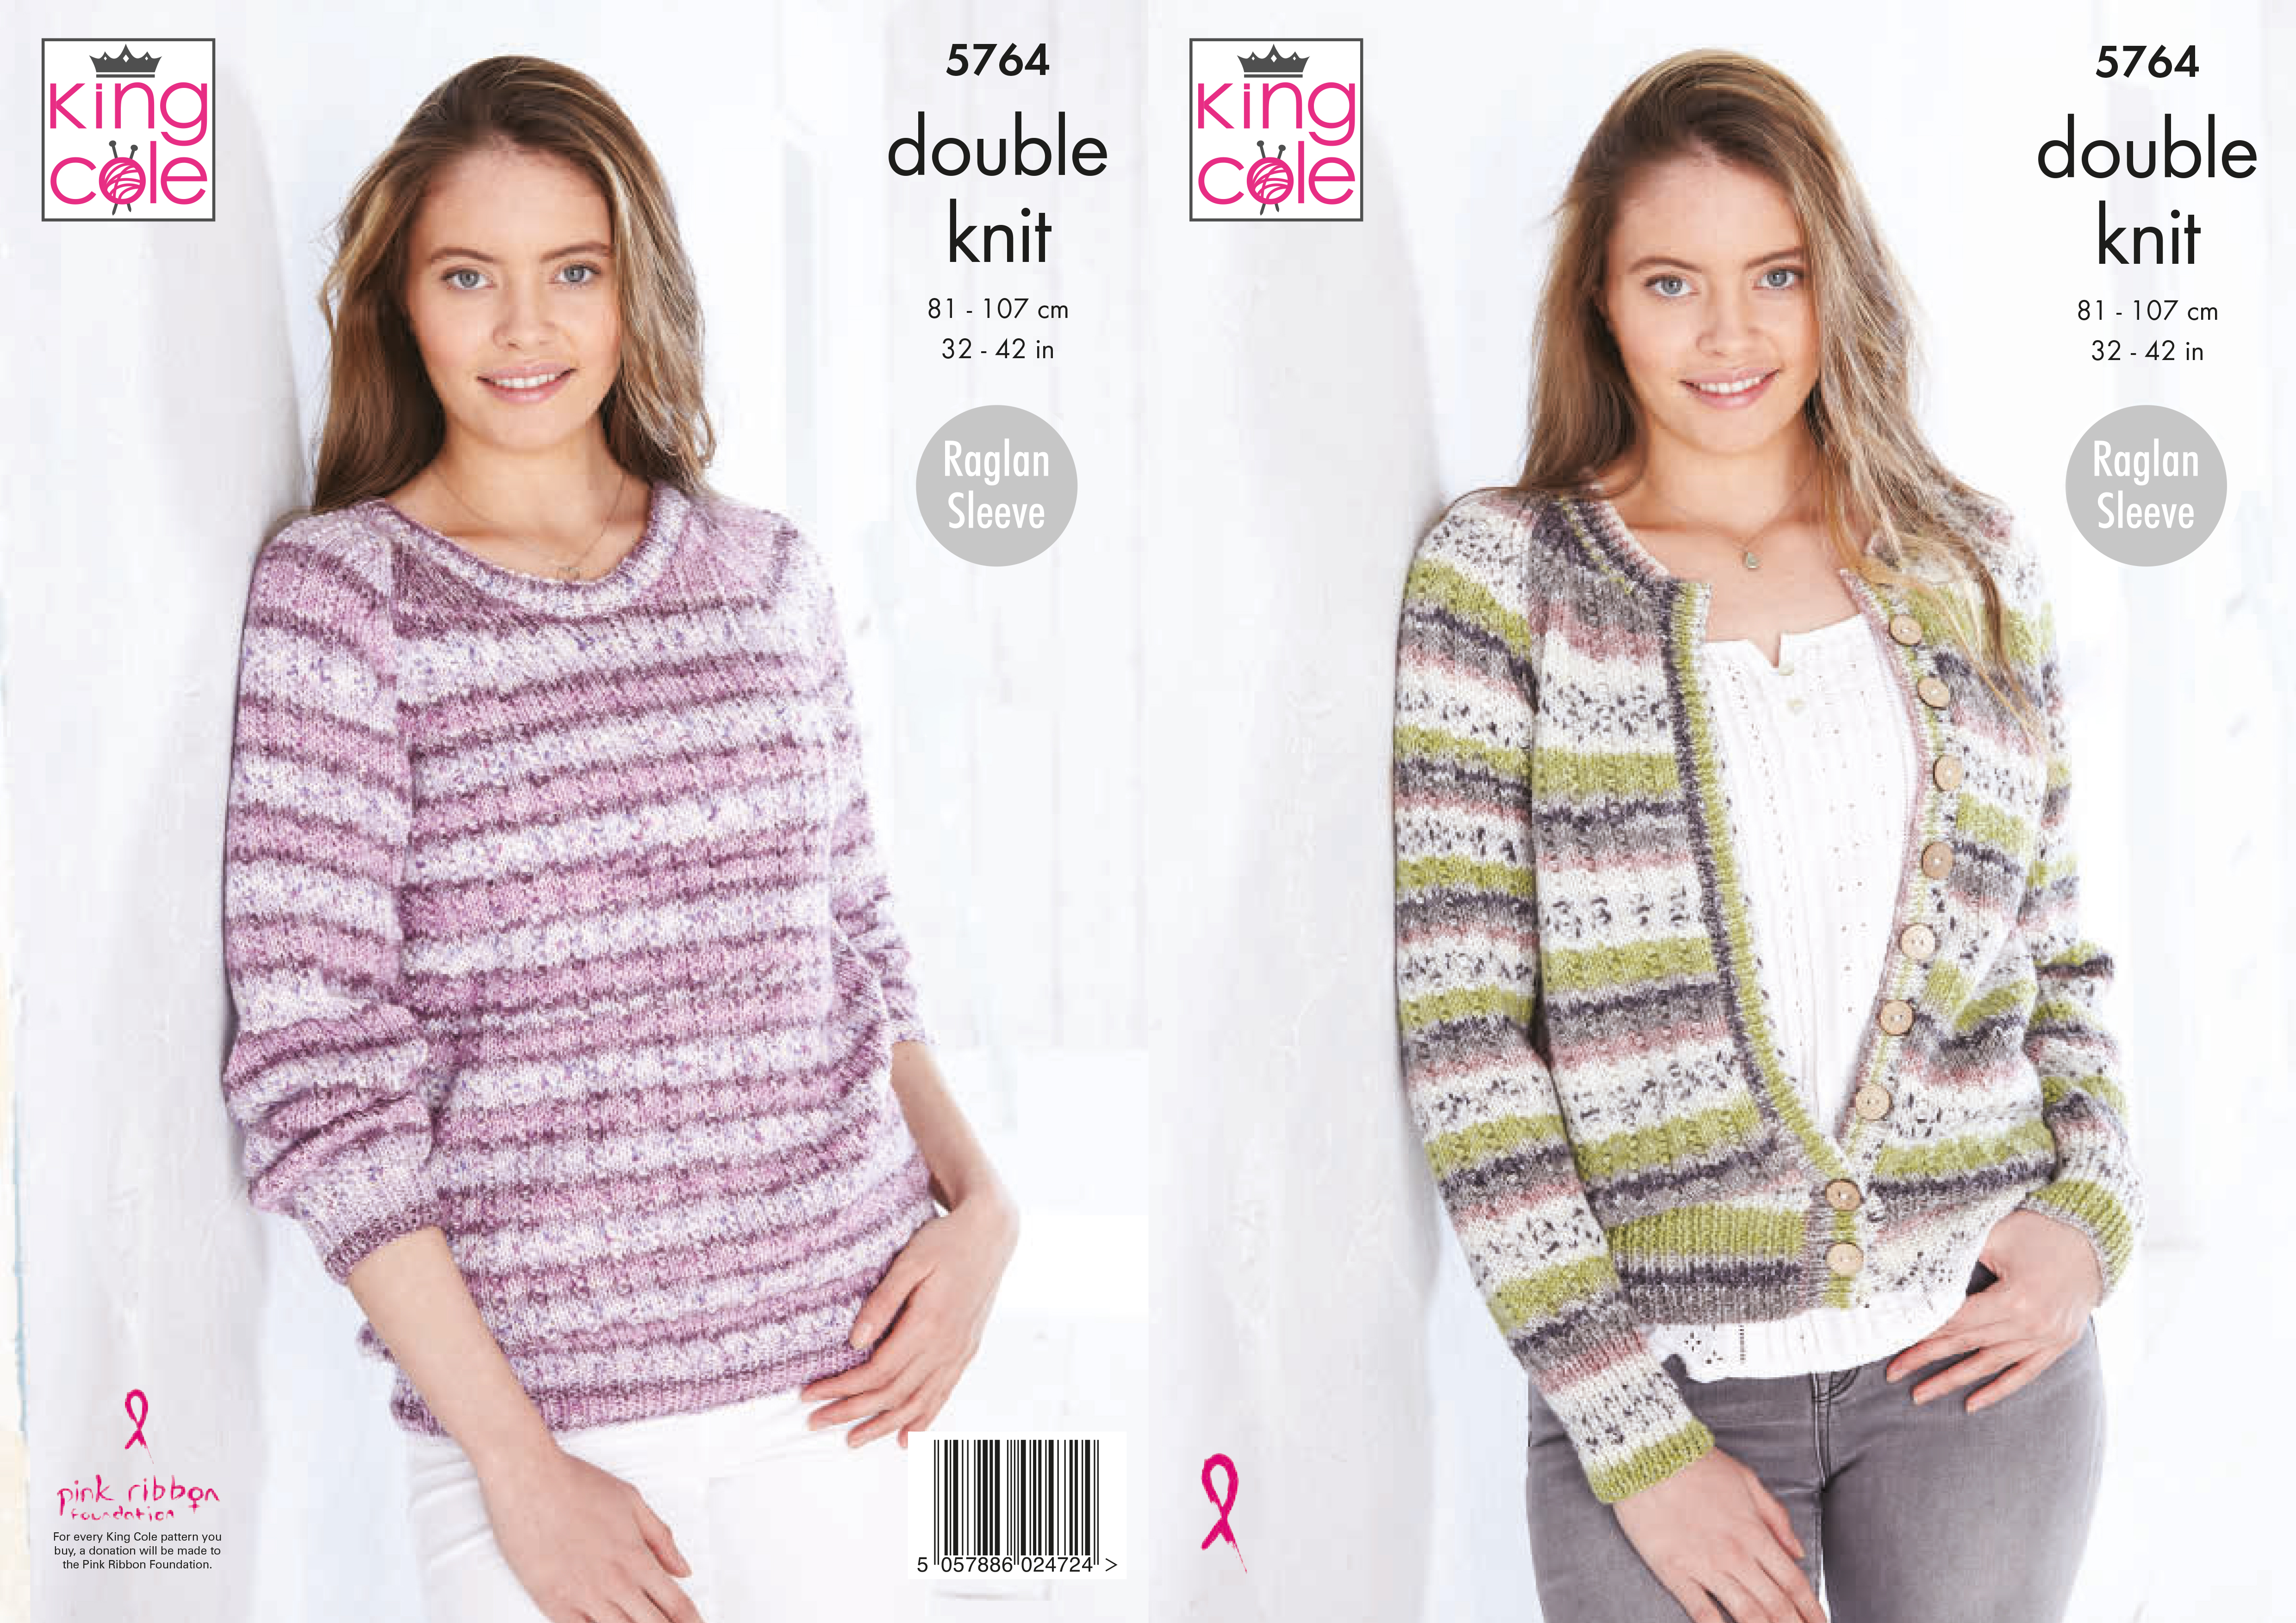 Sweater & Cardigan Knitted in Splash DK 5764 x3 - Click Image to Close